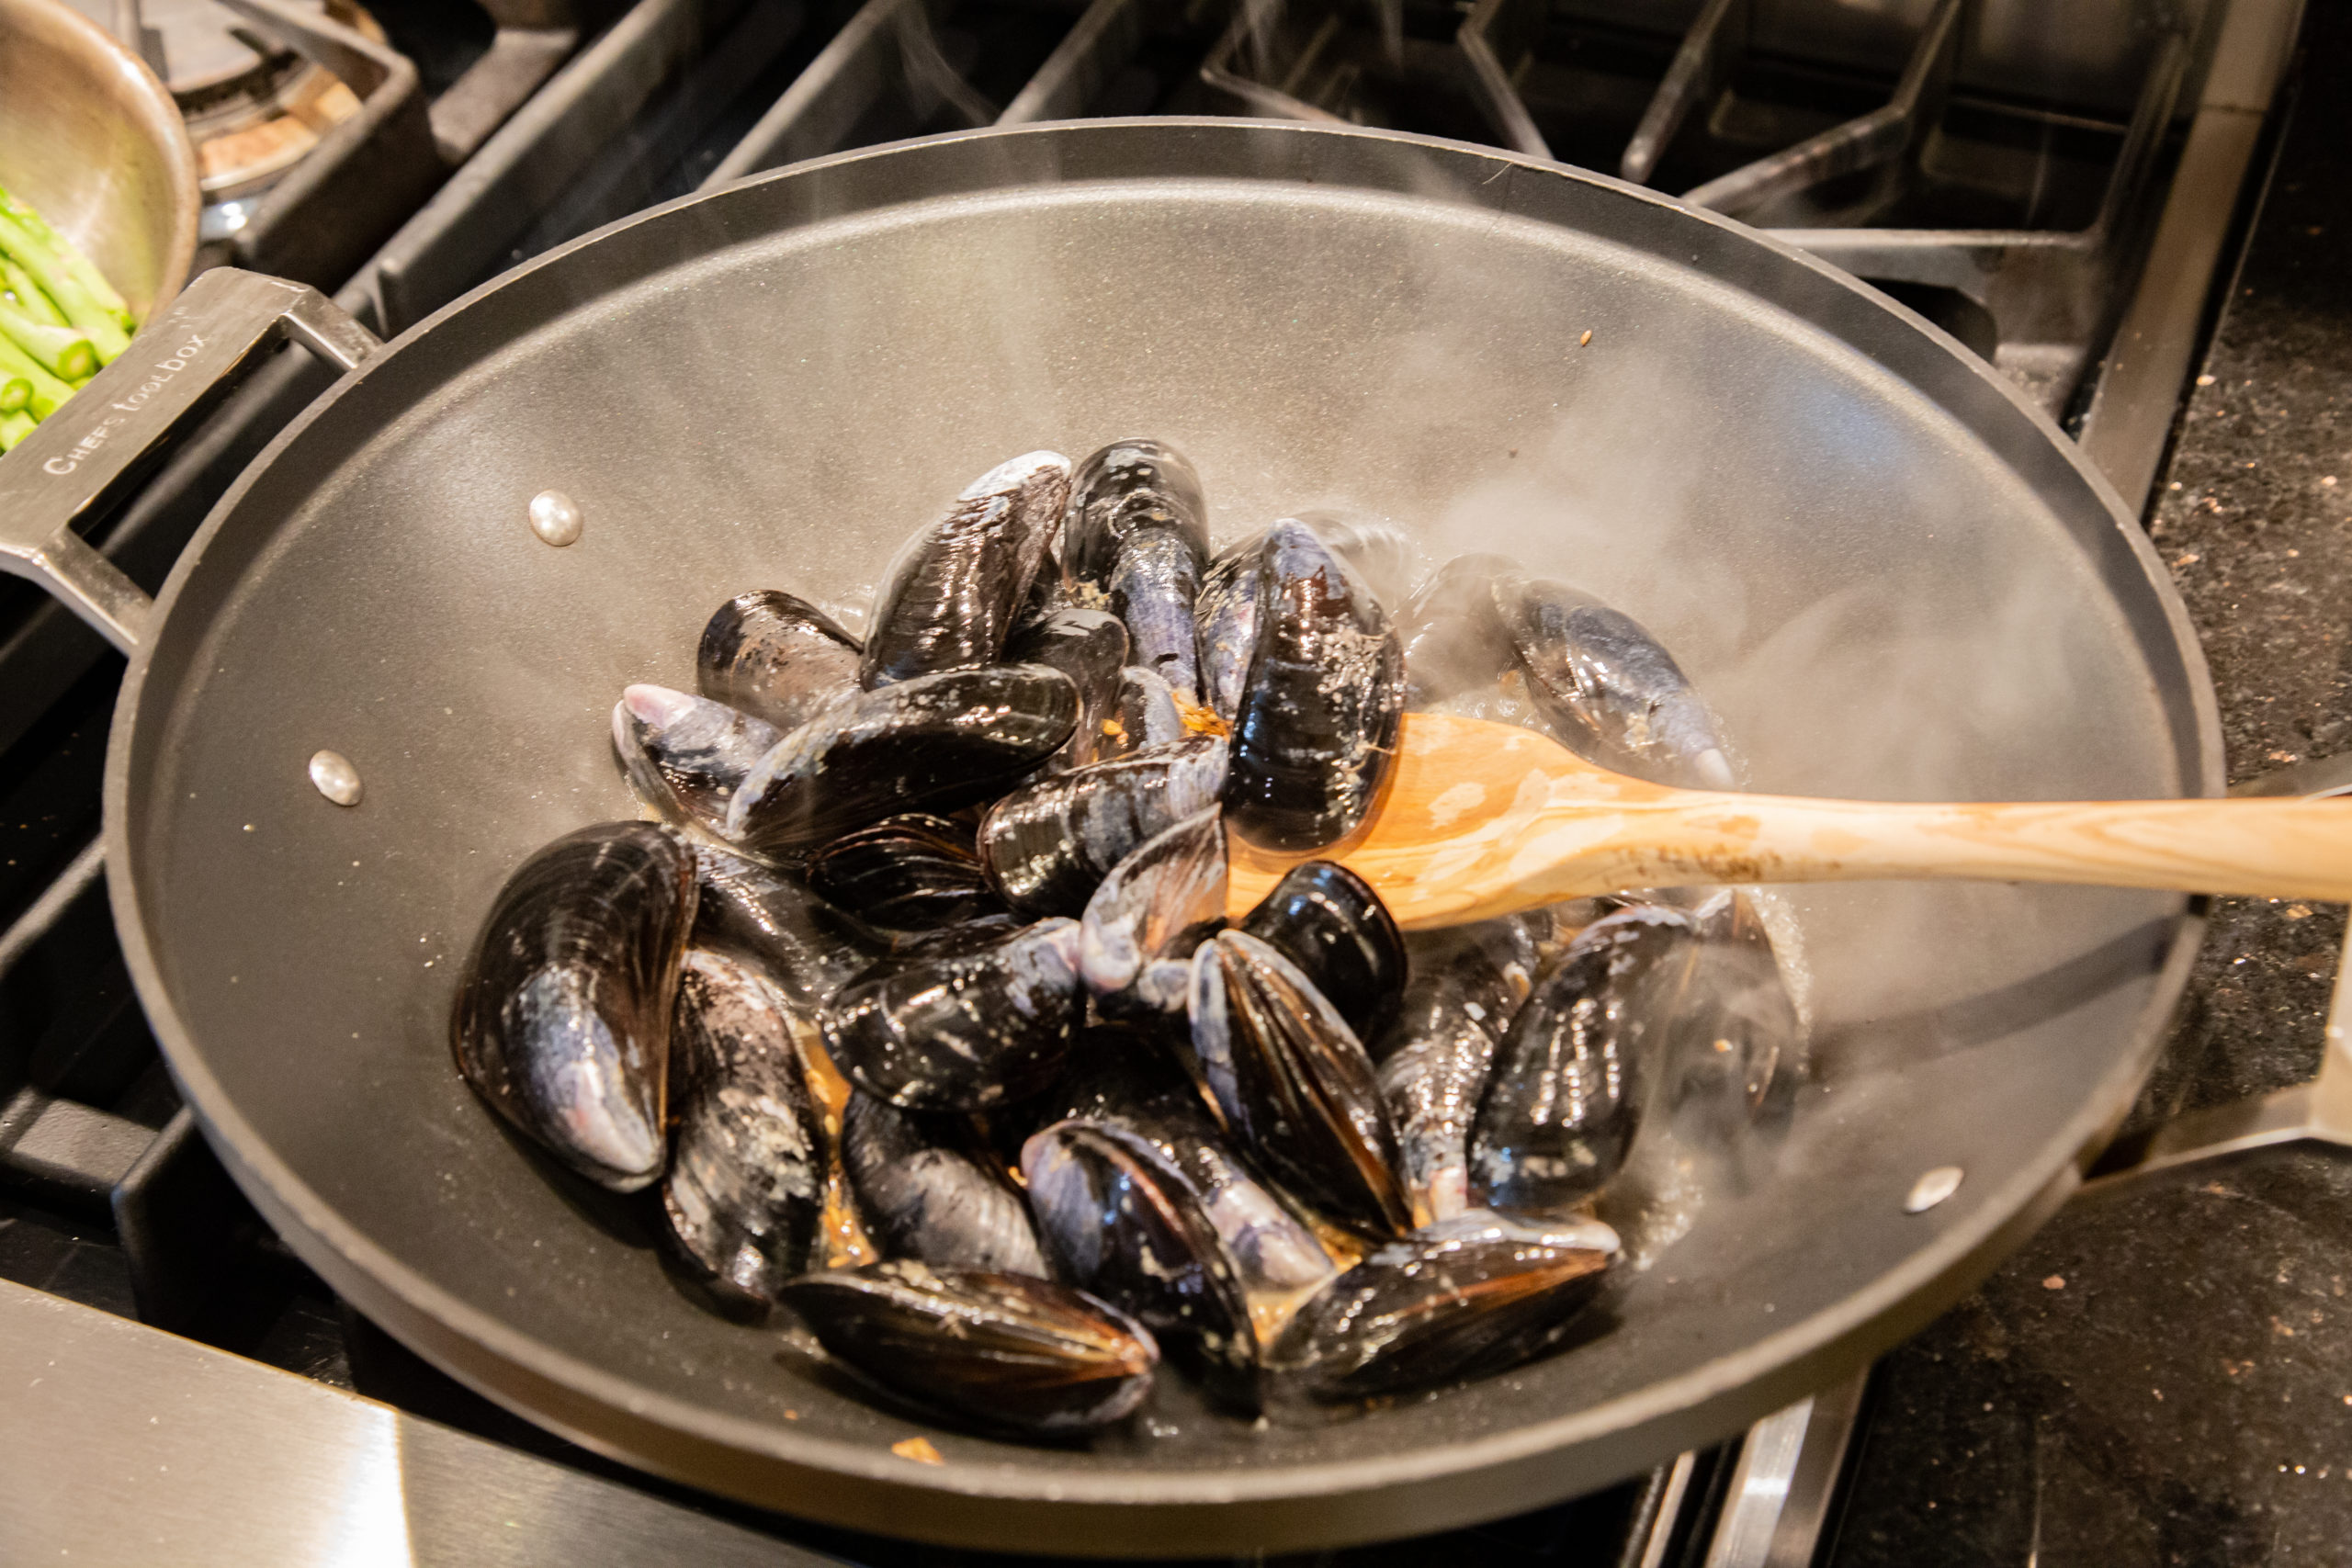 Mussels being mixed with other ingredients.